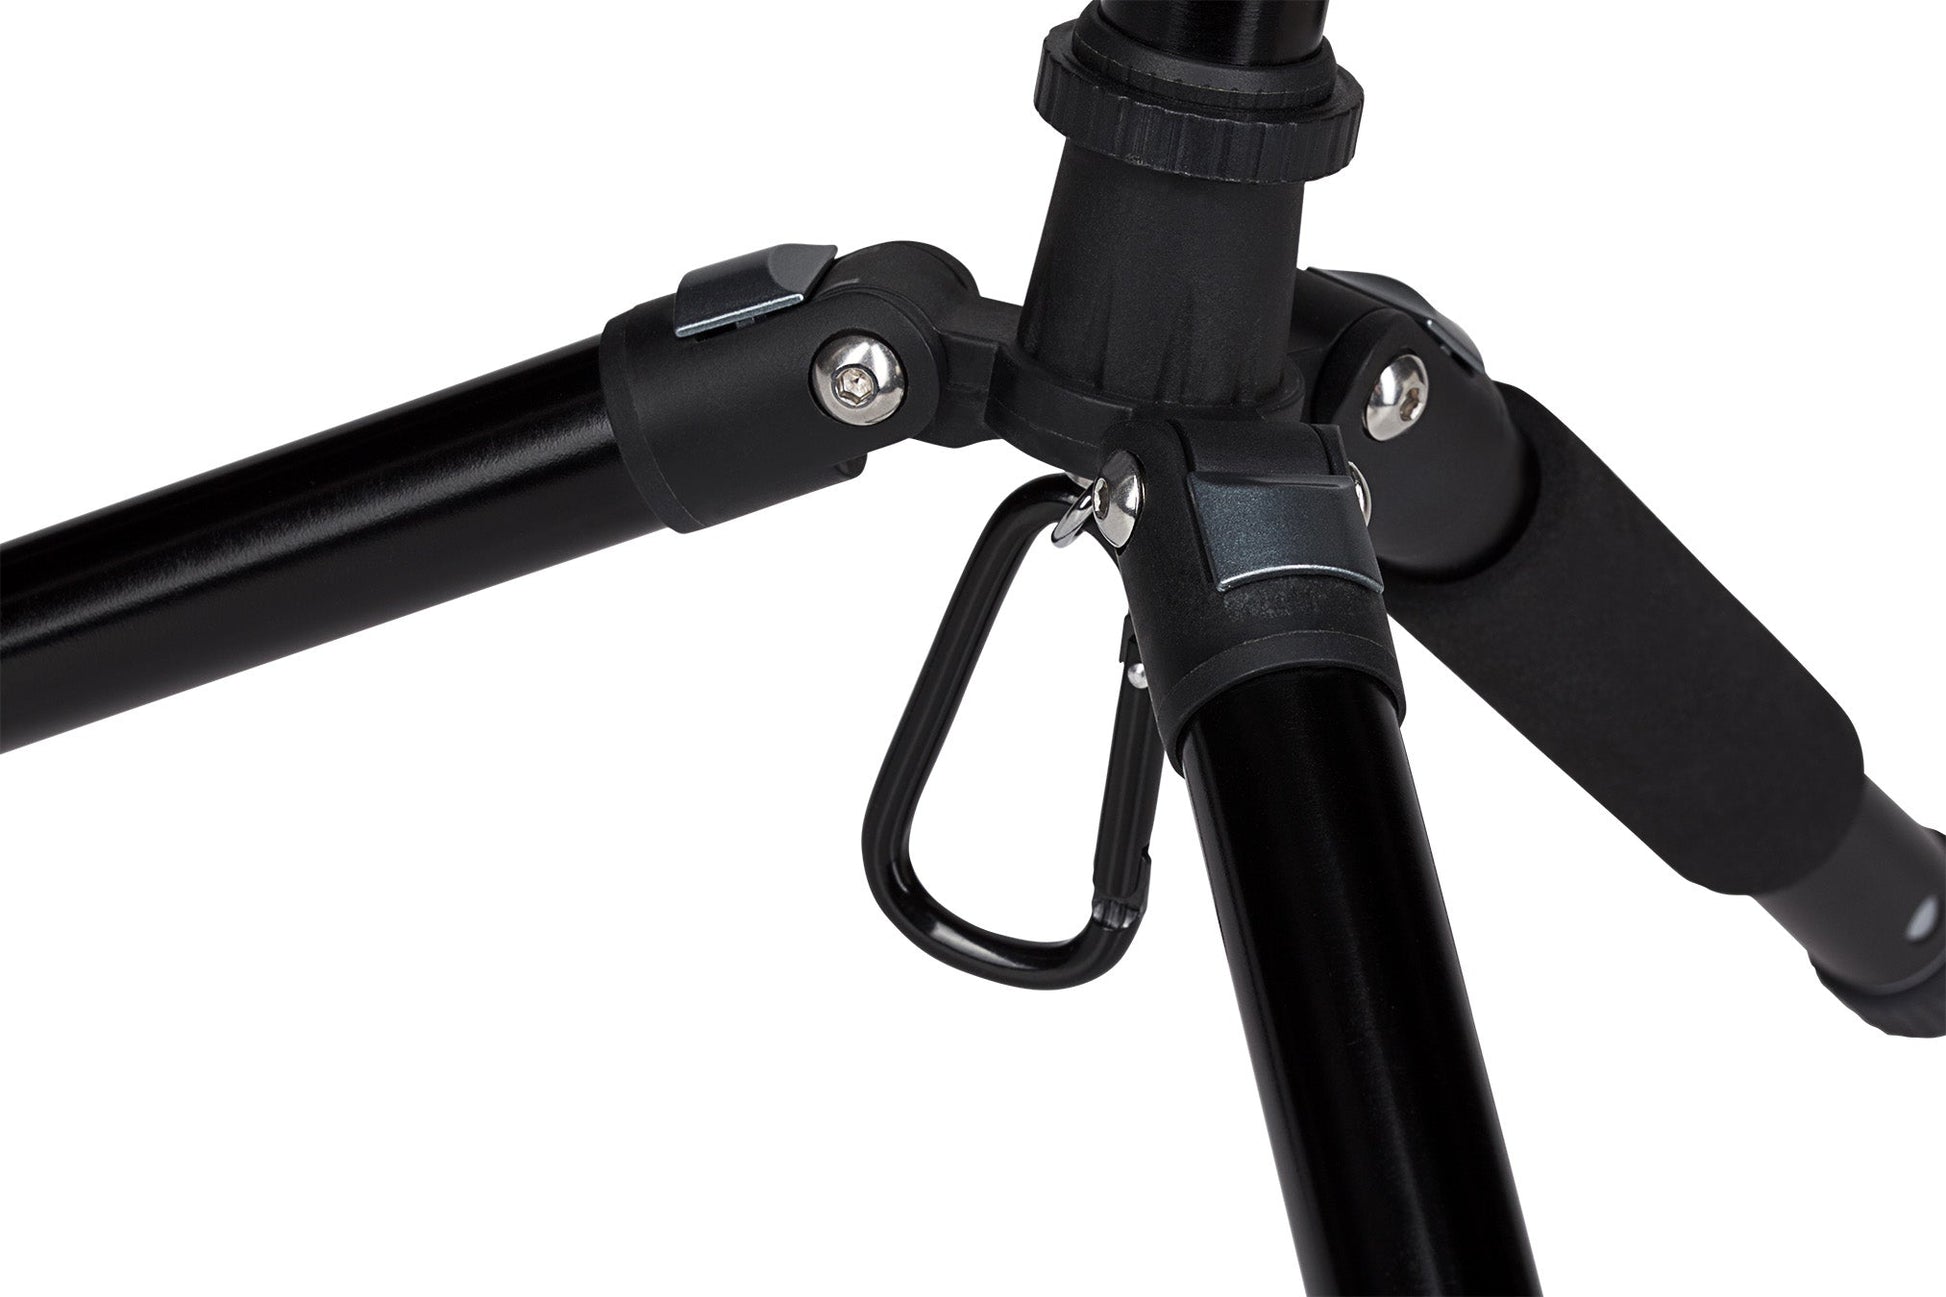 ProSound Portable Compact Tripod with Ball Head and Fully Adjustable Legs - maplin.co.uk